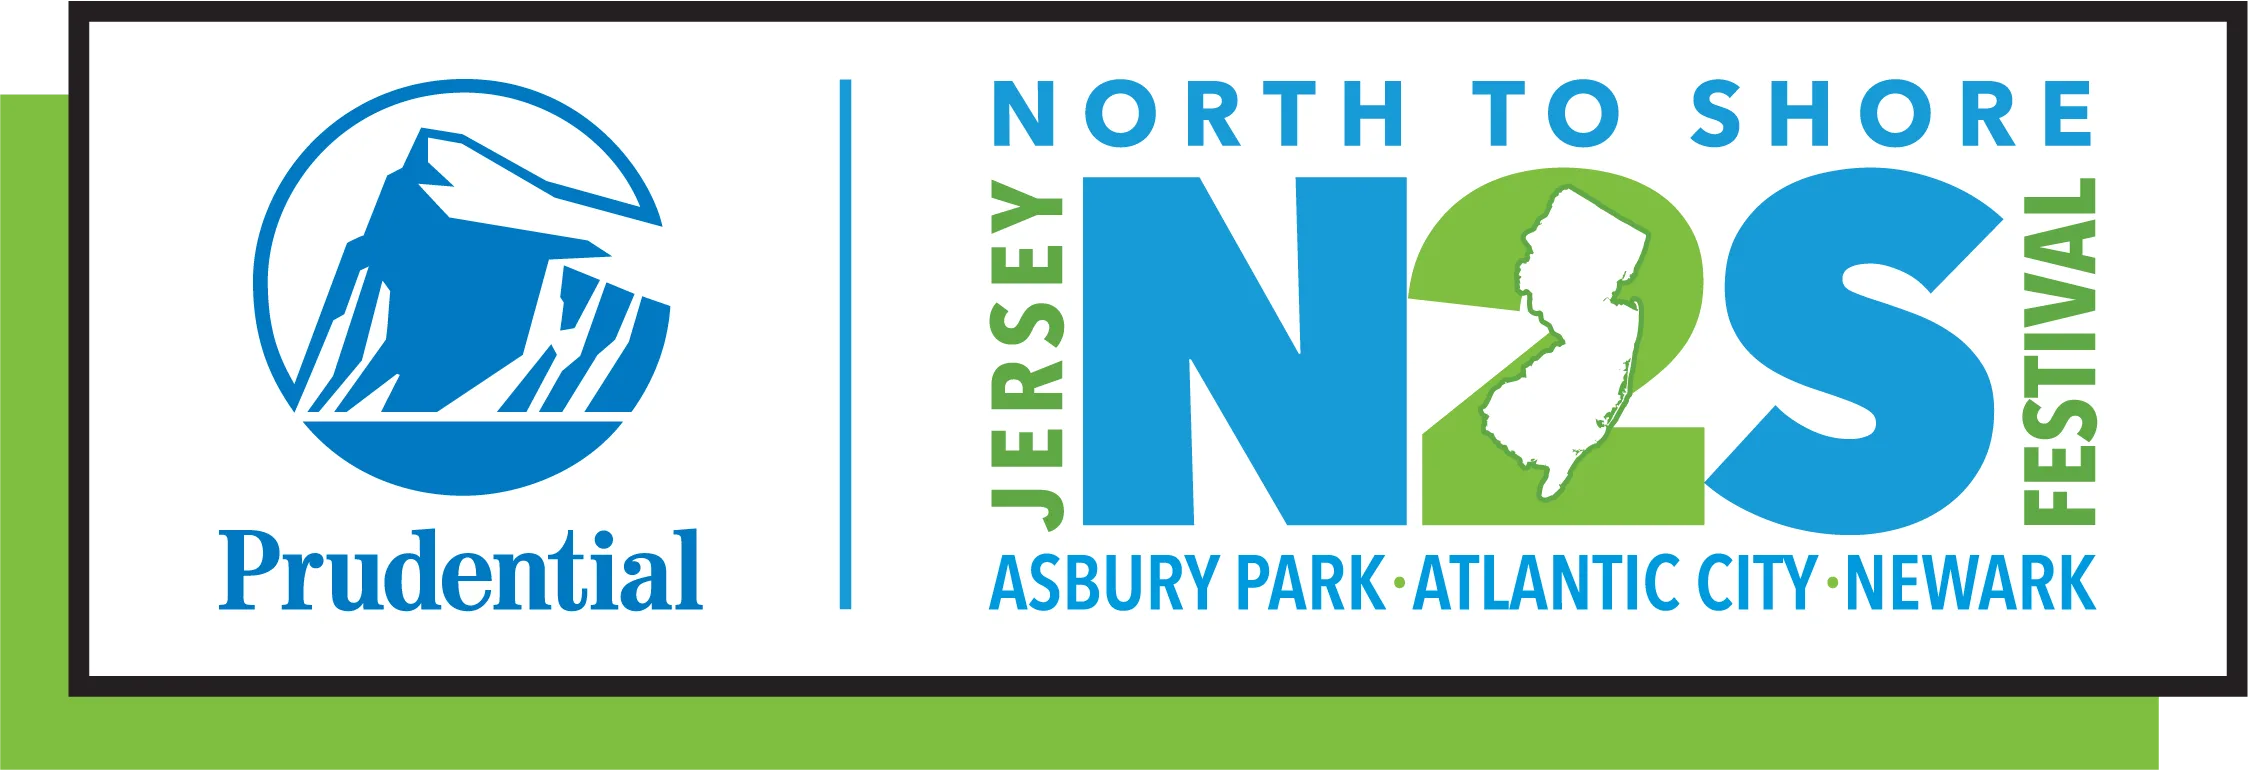 Prudential presents North to Shore logo